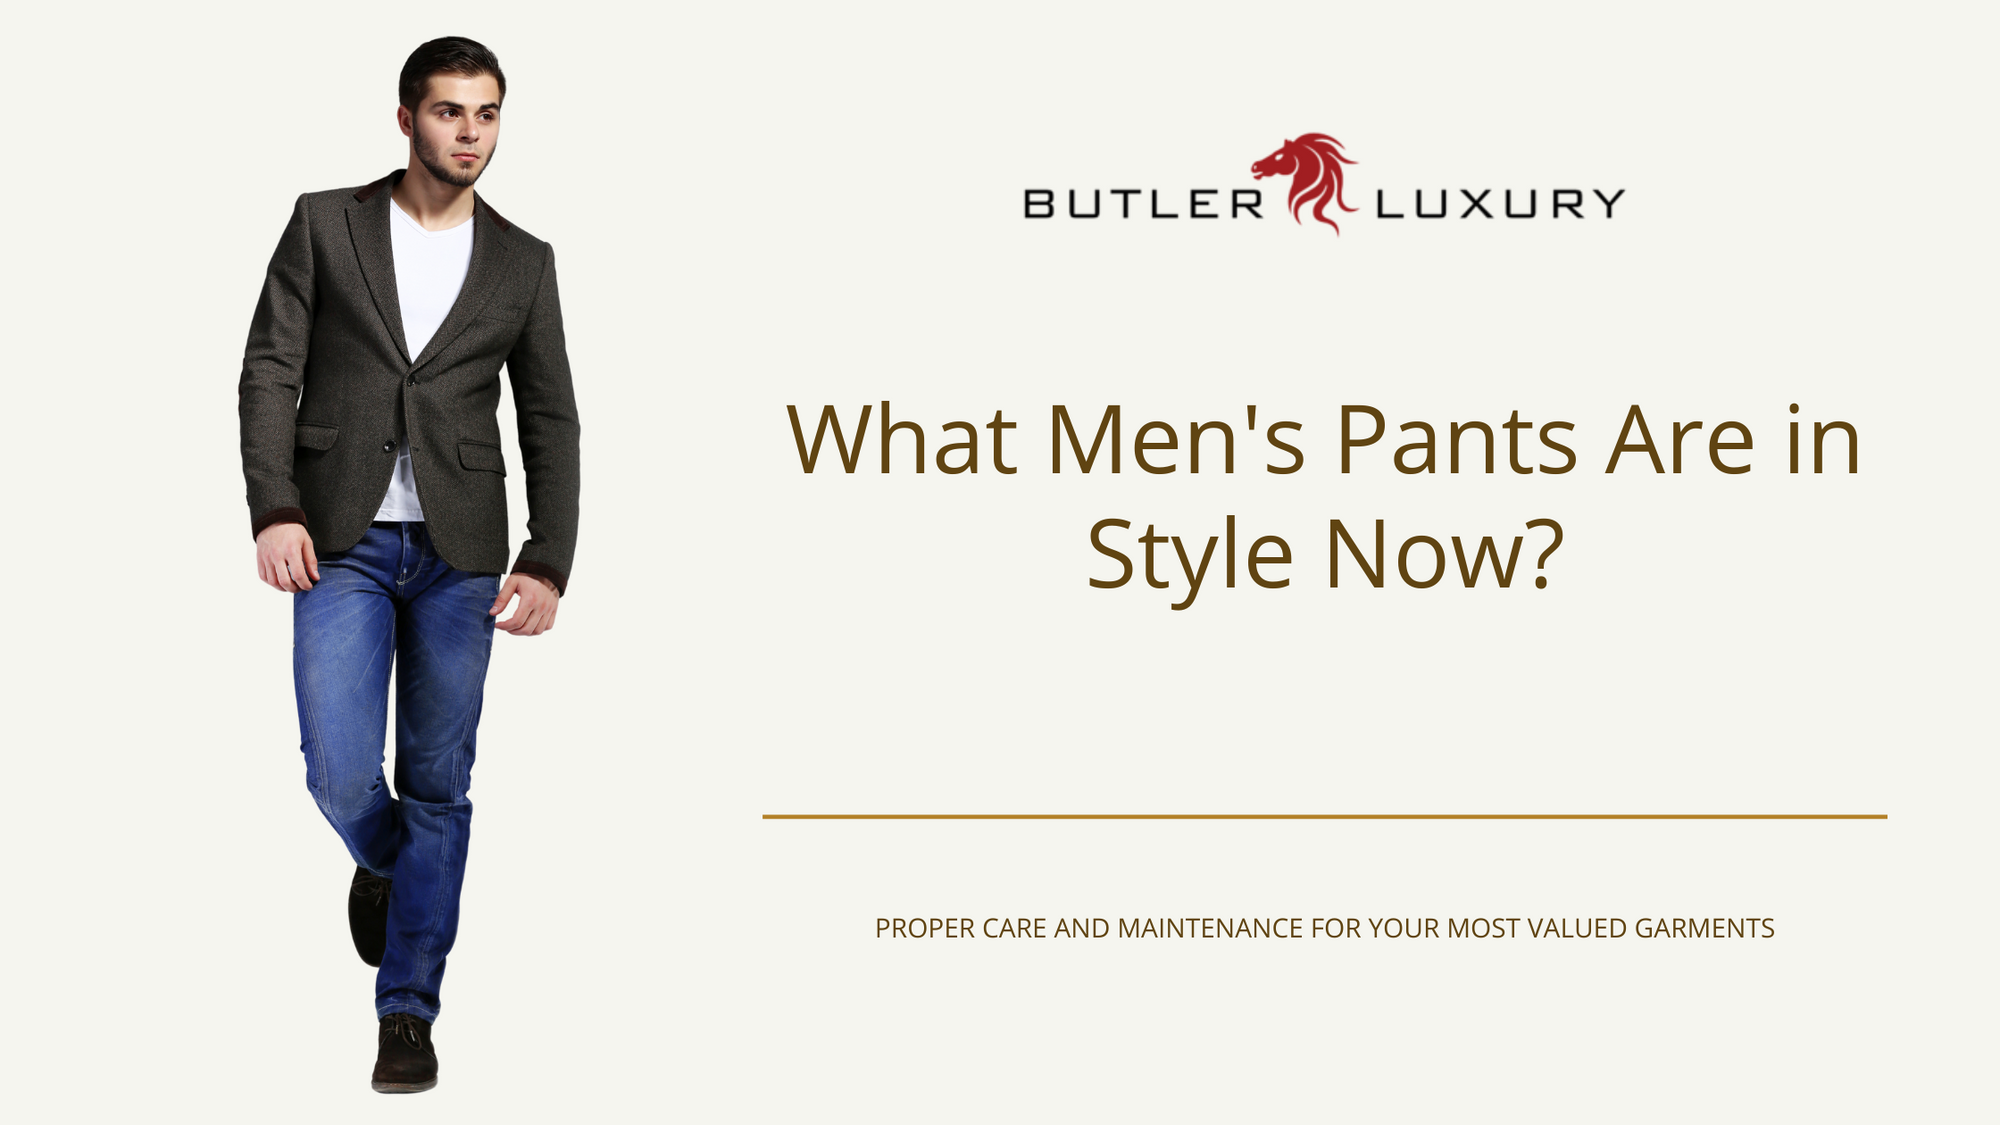 Ask The Butler: What Men's Pants Are in Style Now?